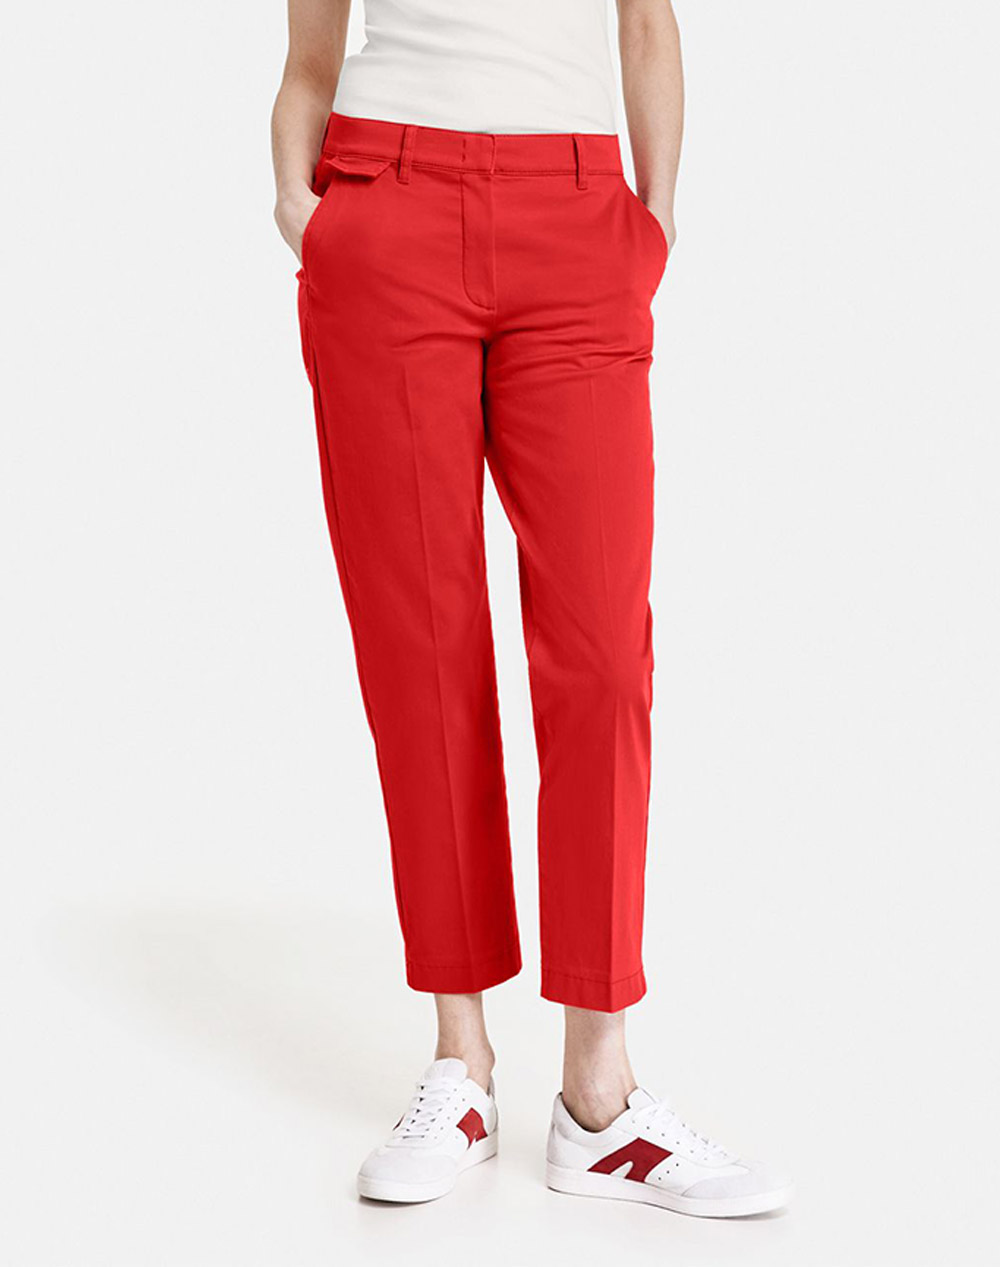 GERRY WEBER PANT LEISURE CROPPED 822030-67712-60699 ValentineRed 3610AGERR2000125_XR19377